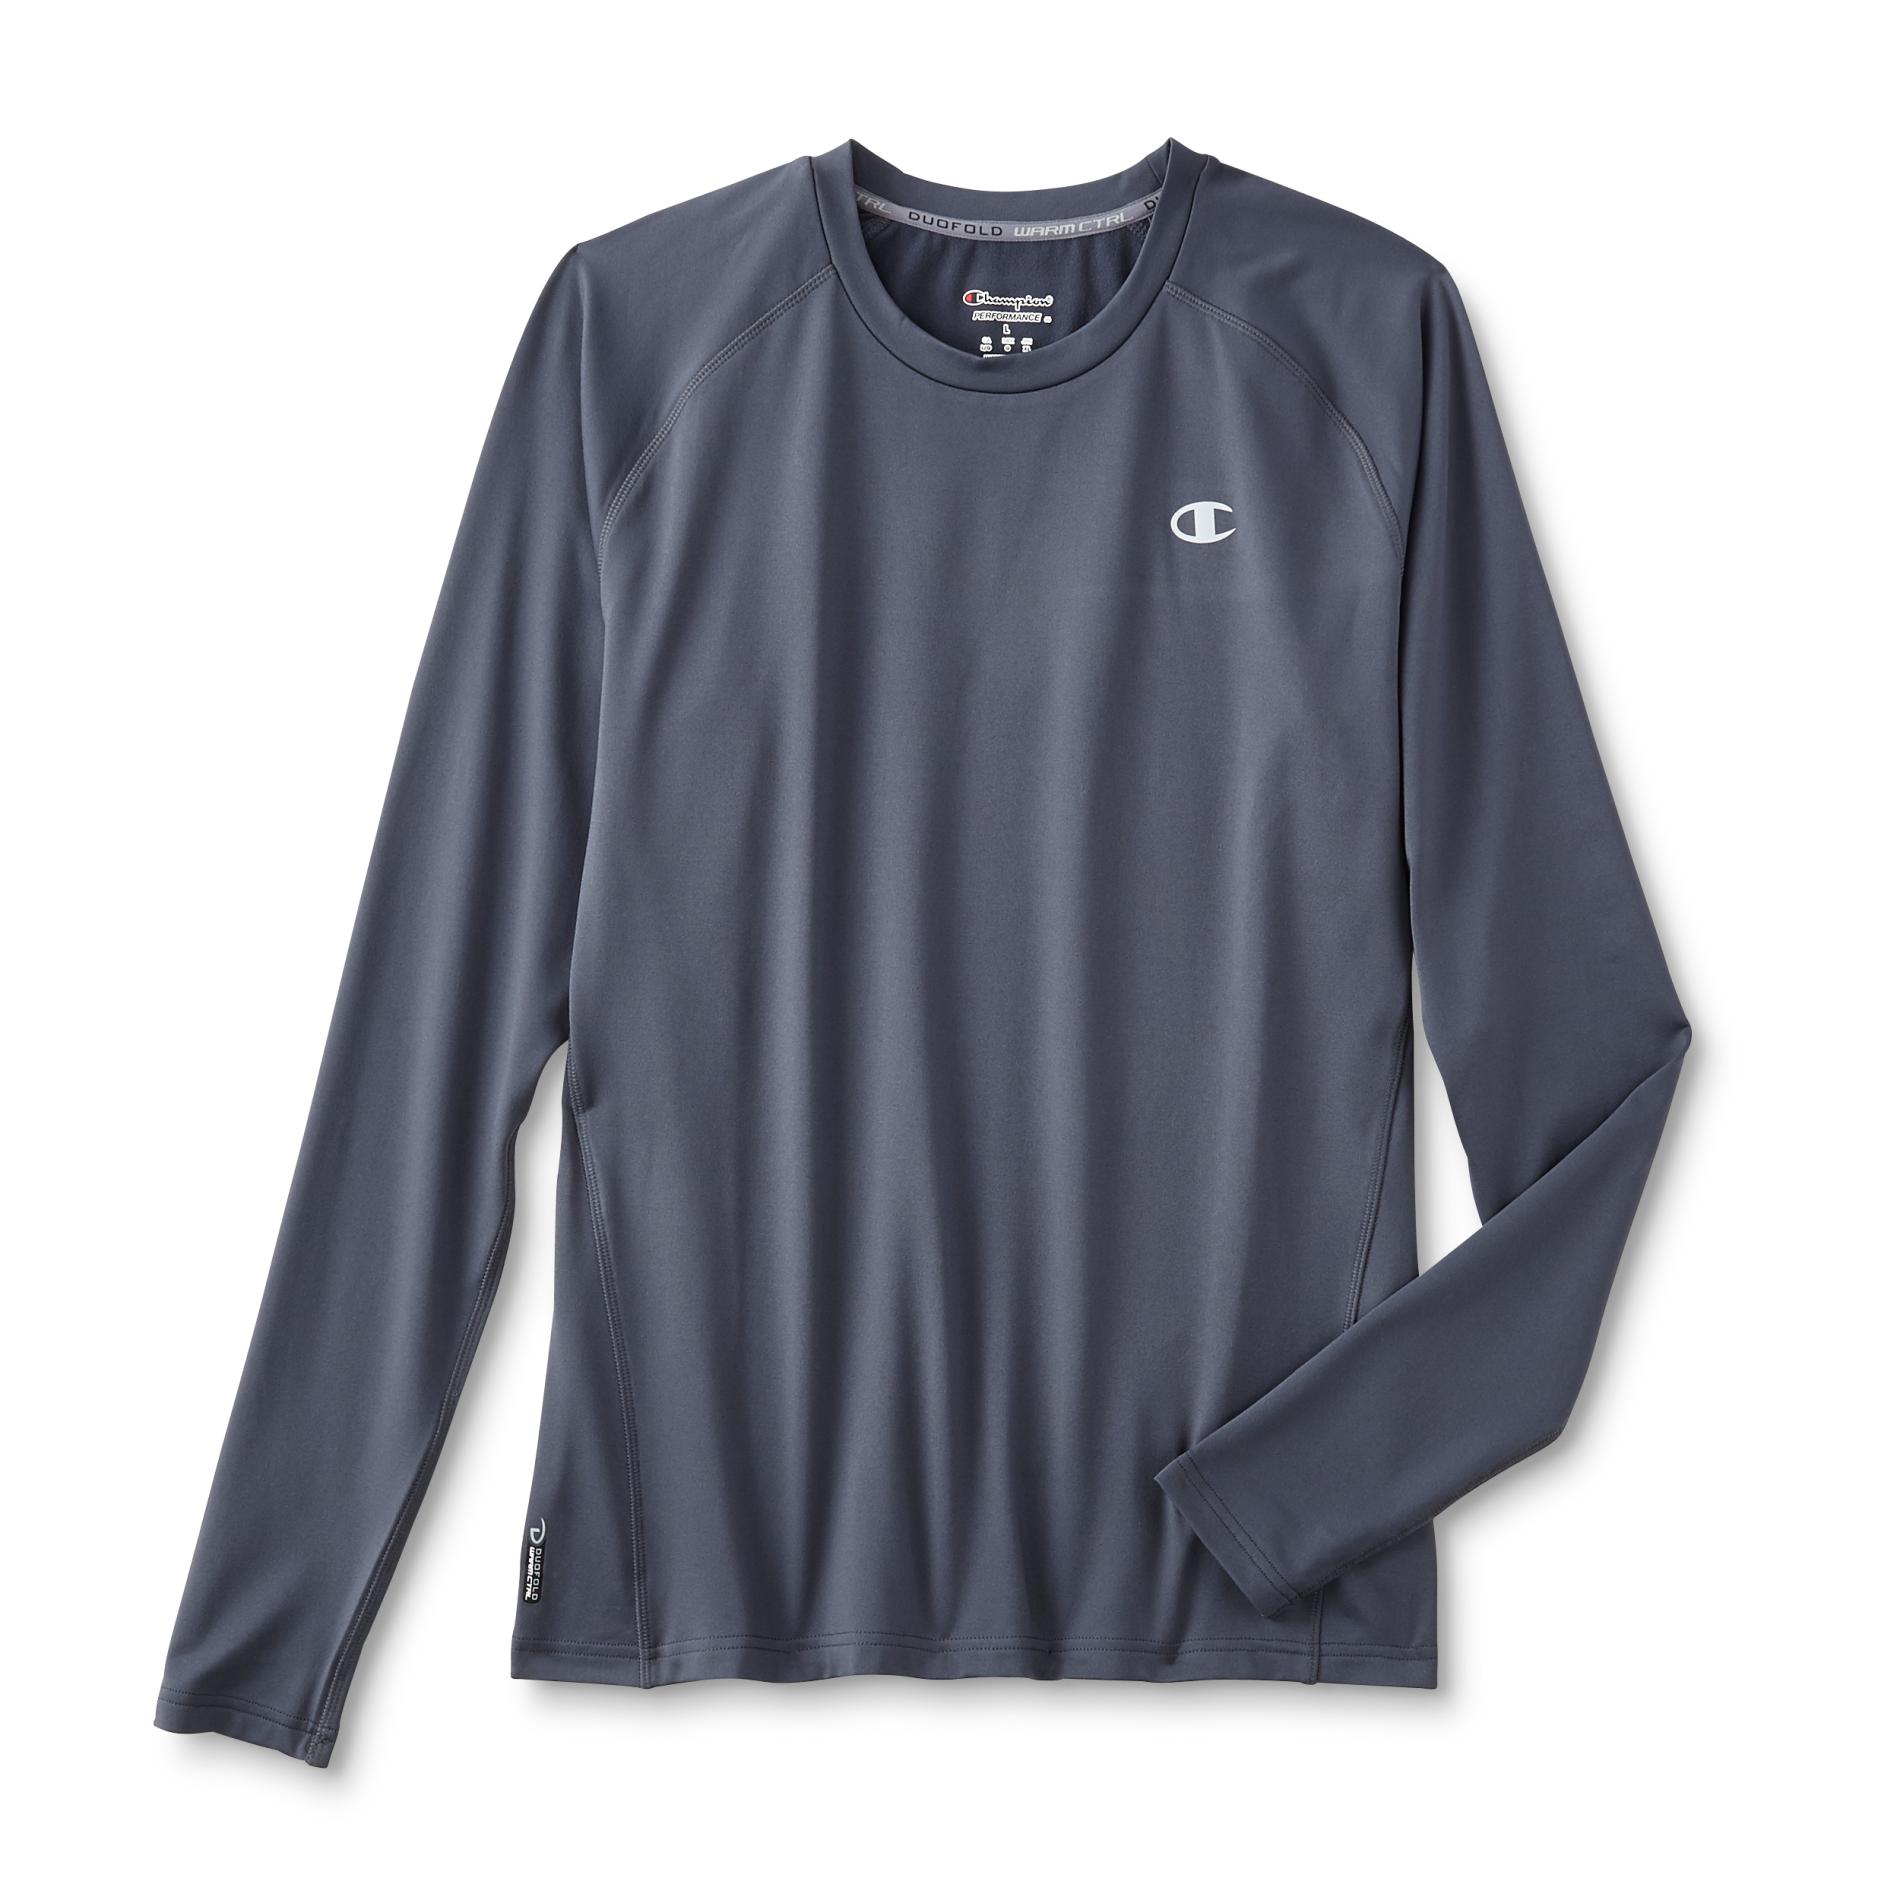 Champion Young Men's Lined Athletic Shirt